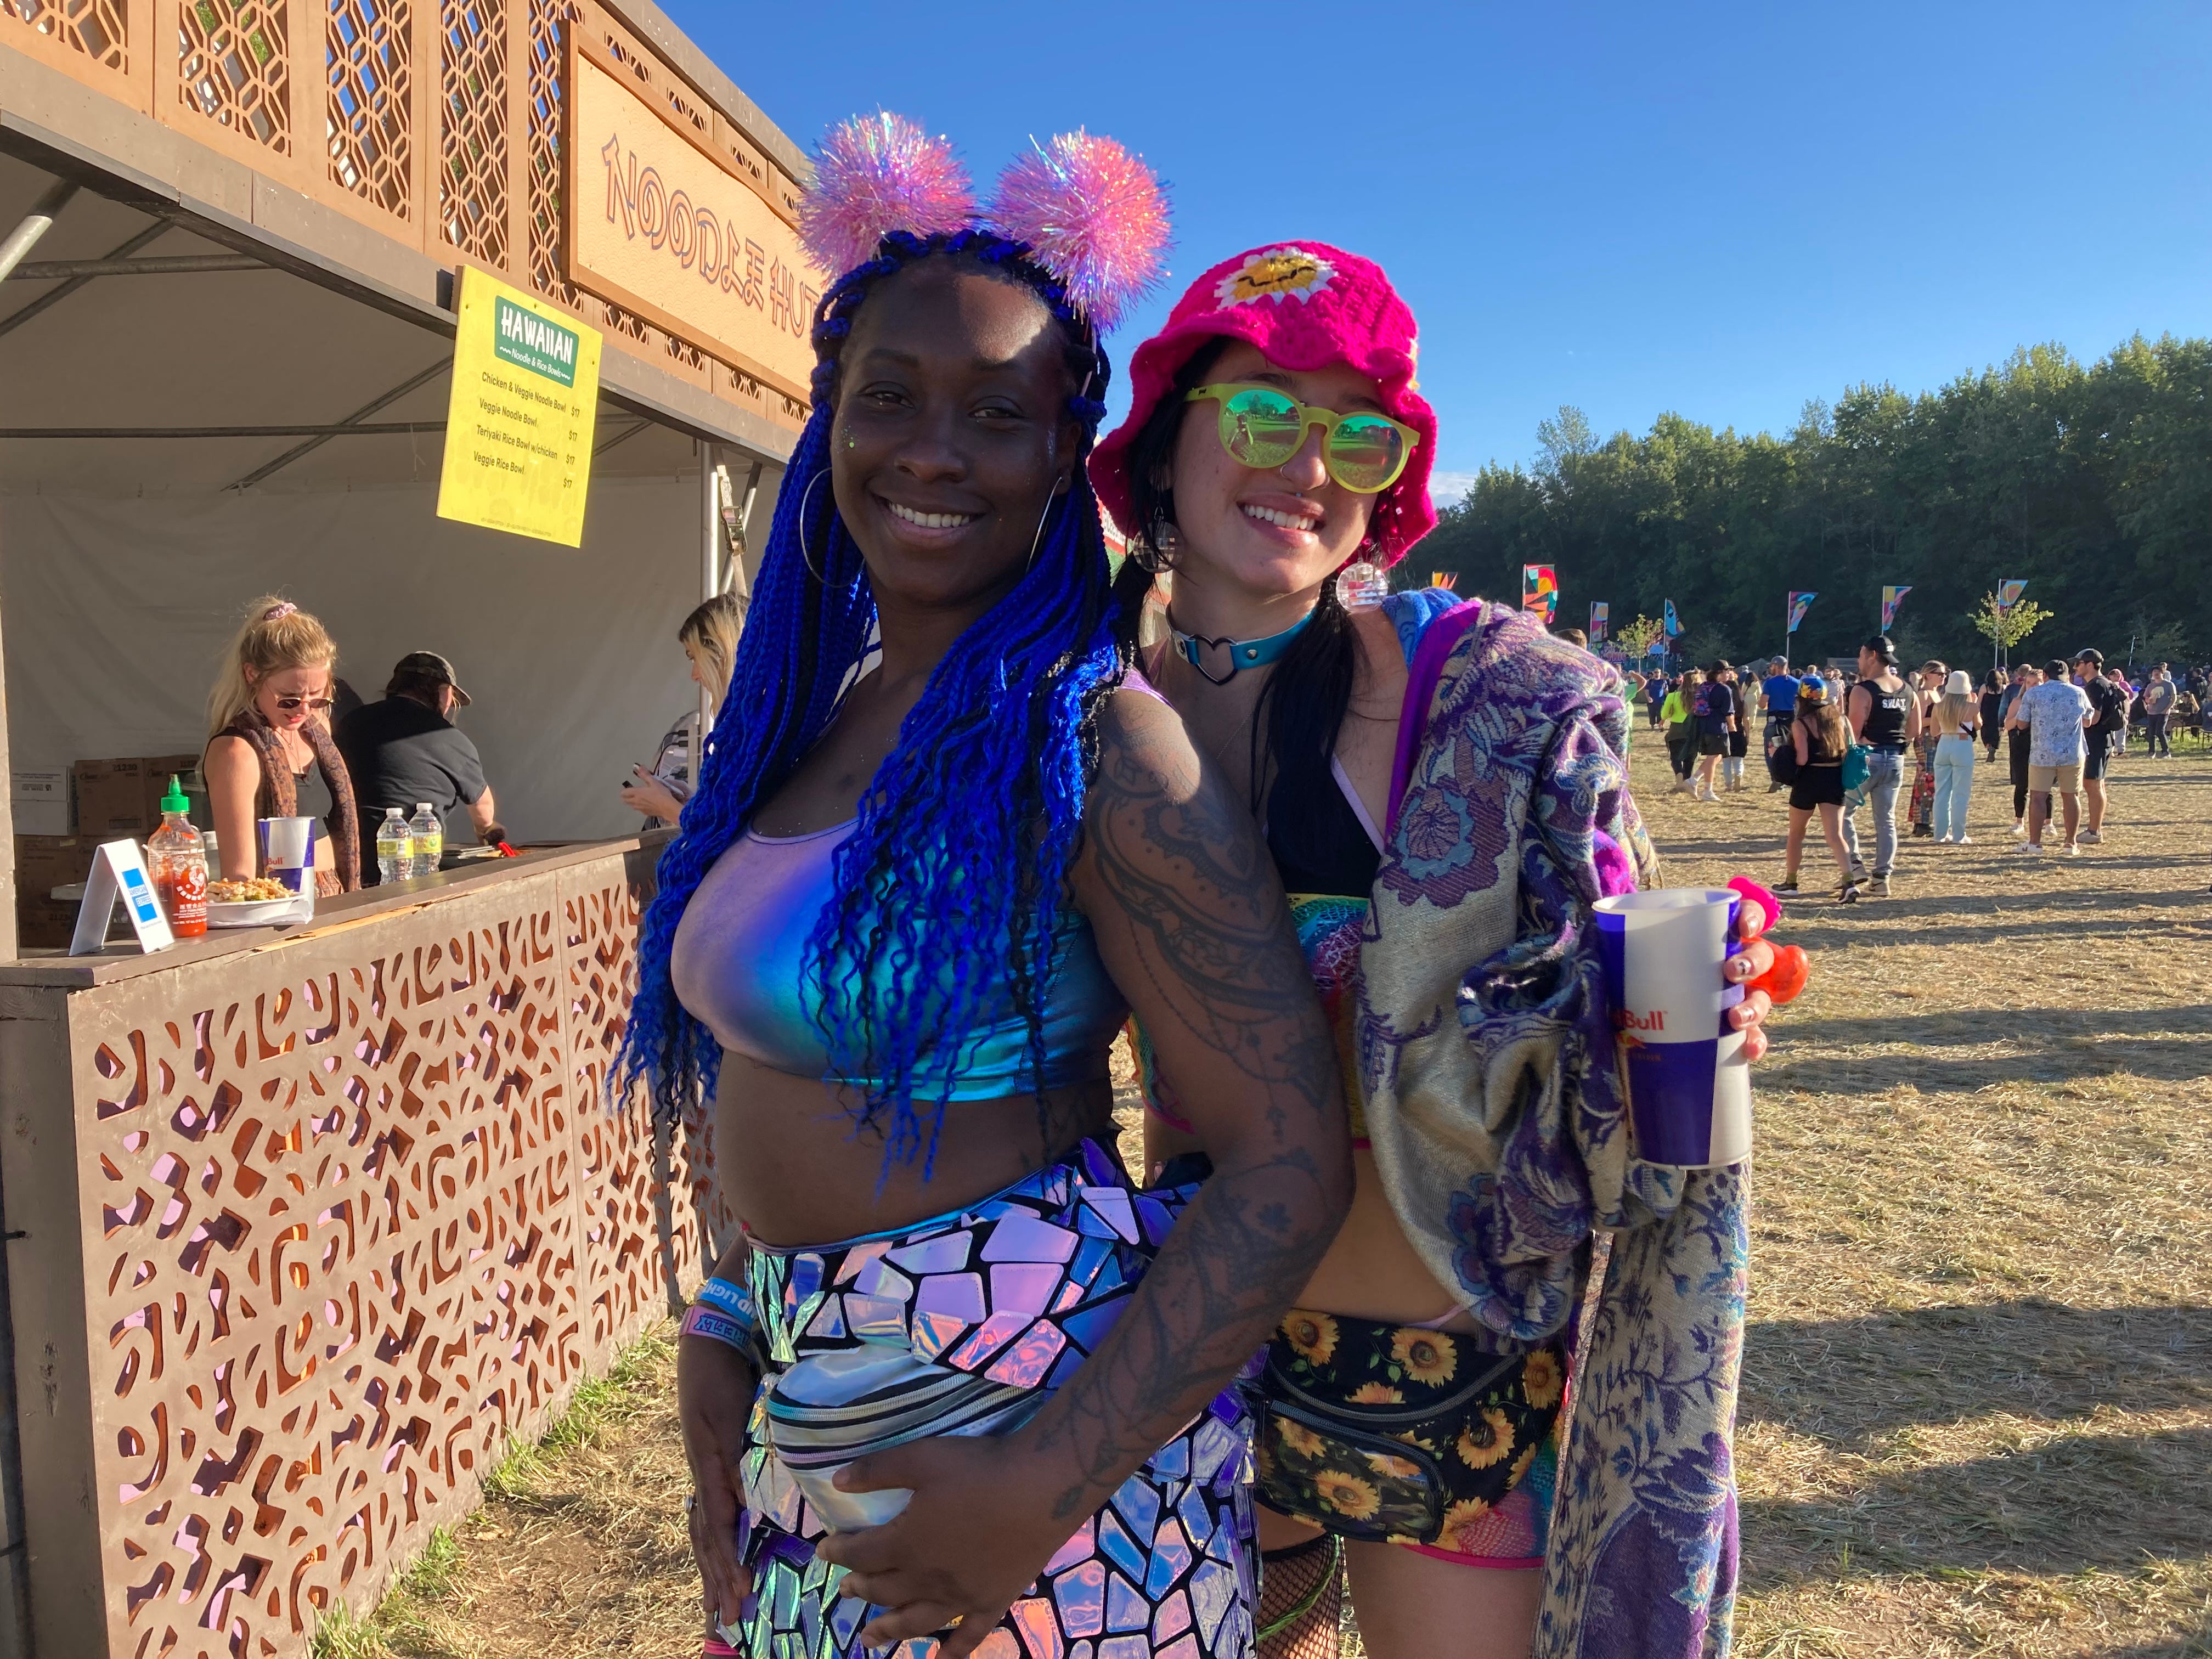 Fashion at Firefly Festival: The good, the bad and the bizarre